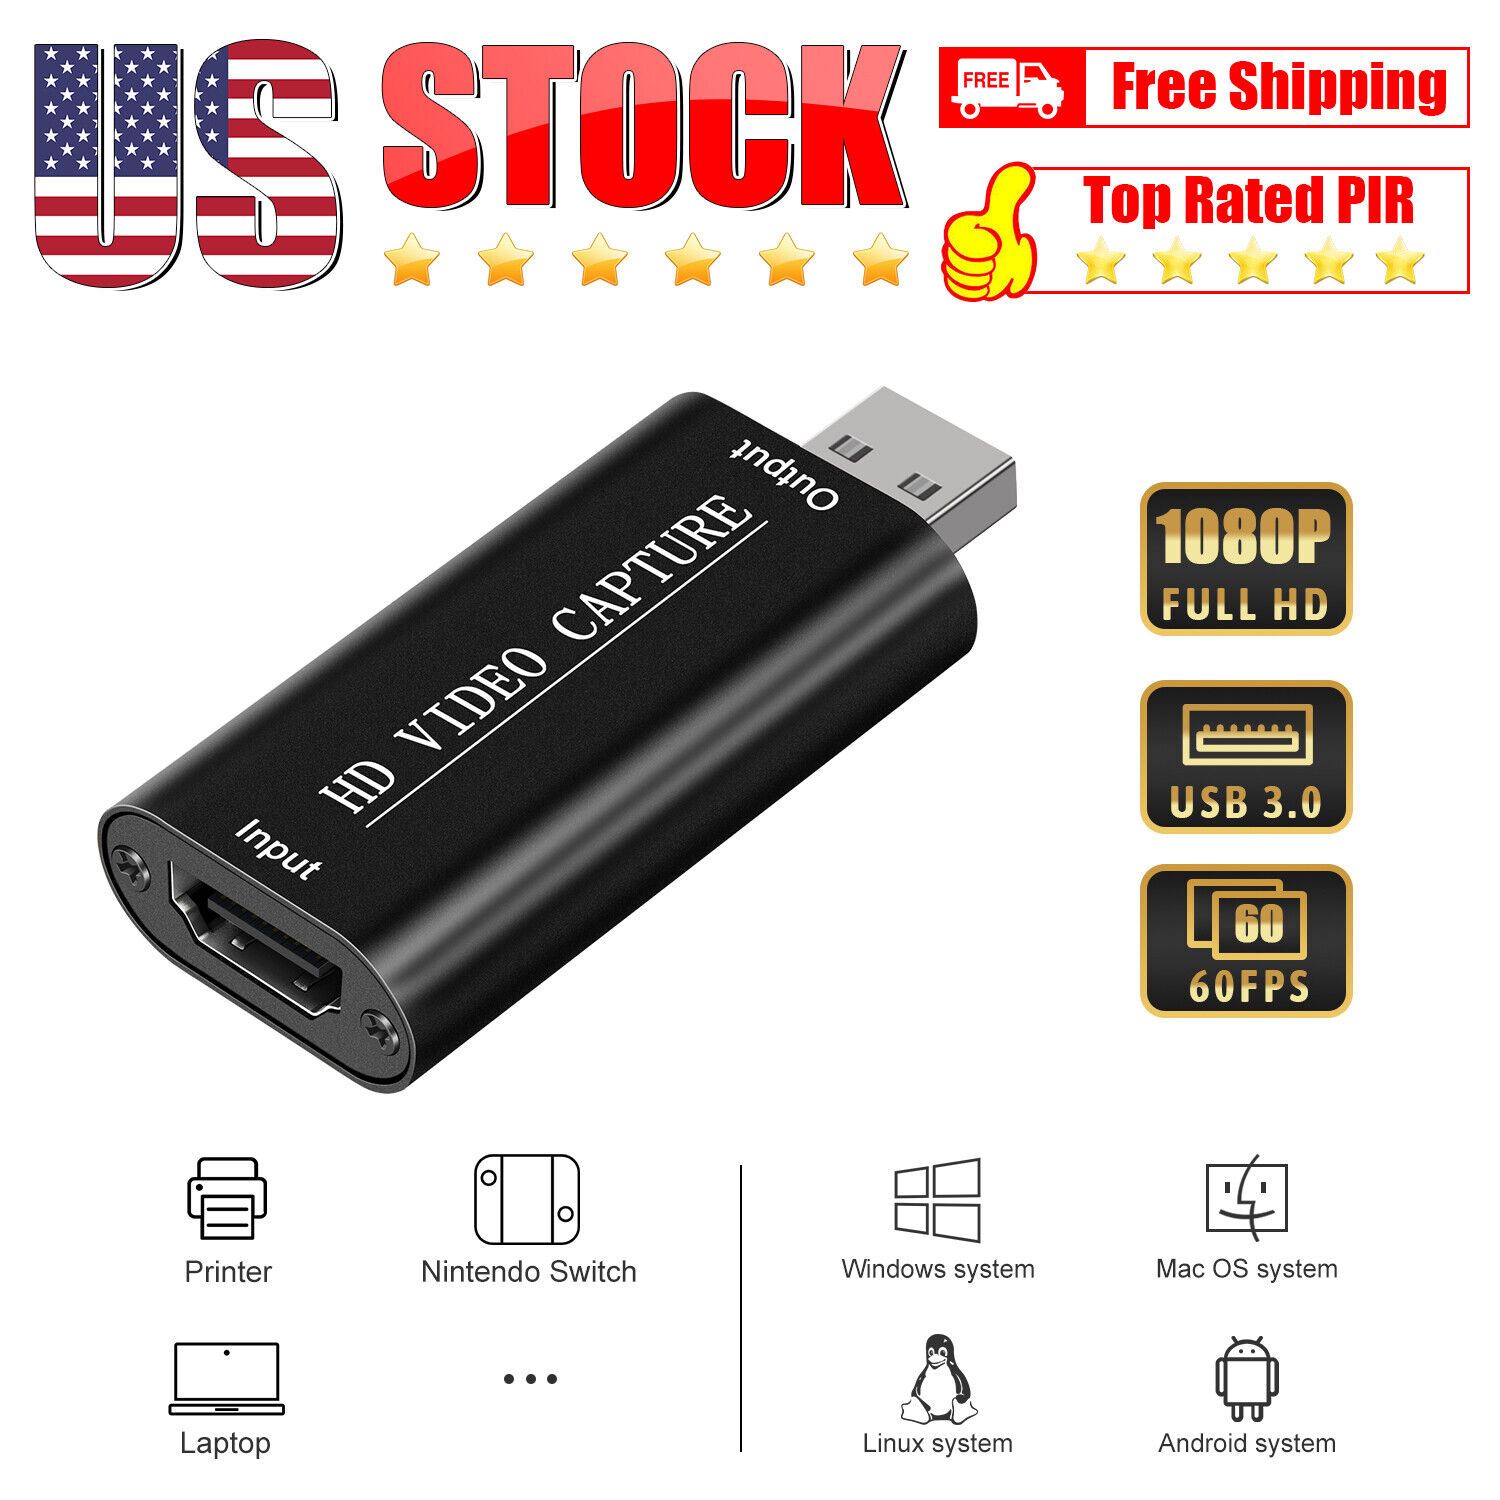 HDMI Video Capture, Audio Video Capture Cards HDMI to USB, Full HD 1080 USB 2.0